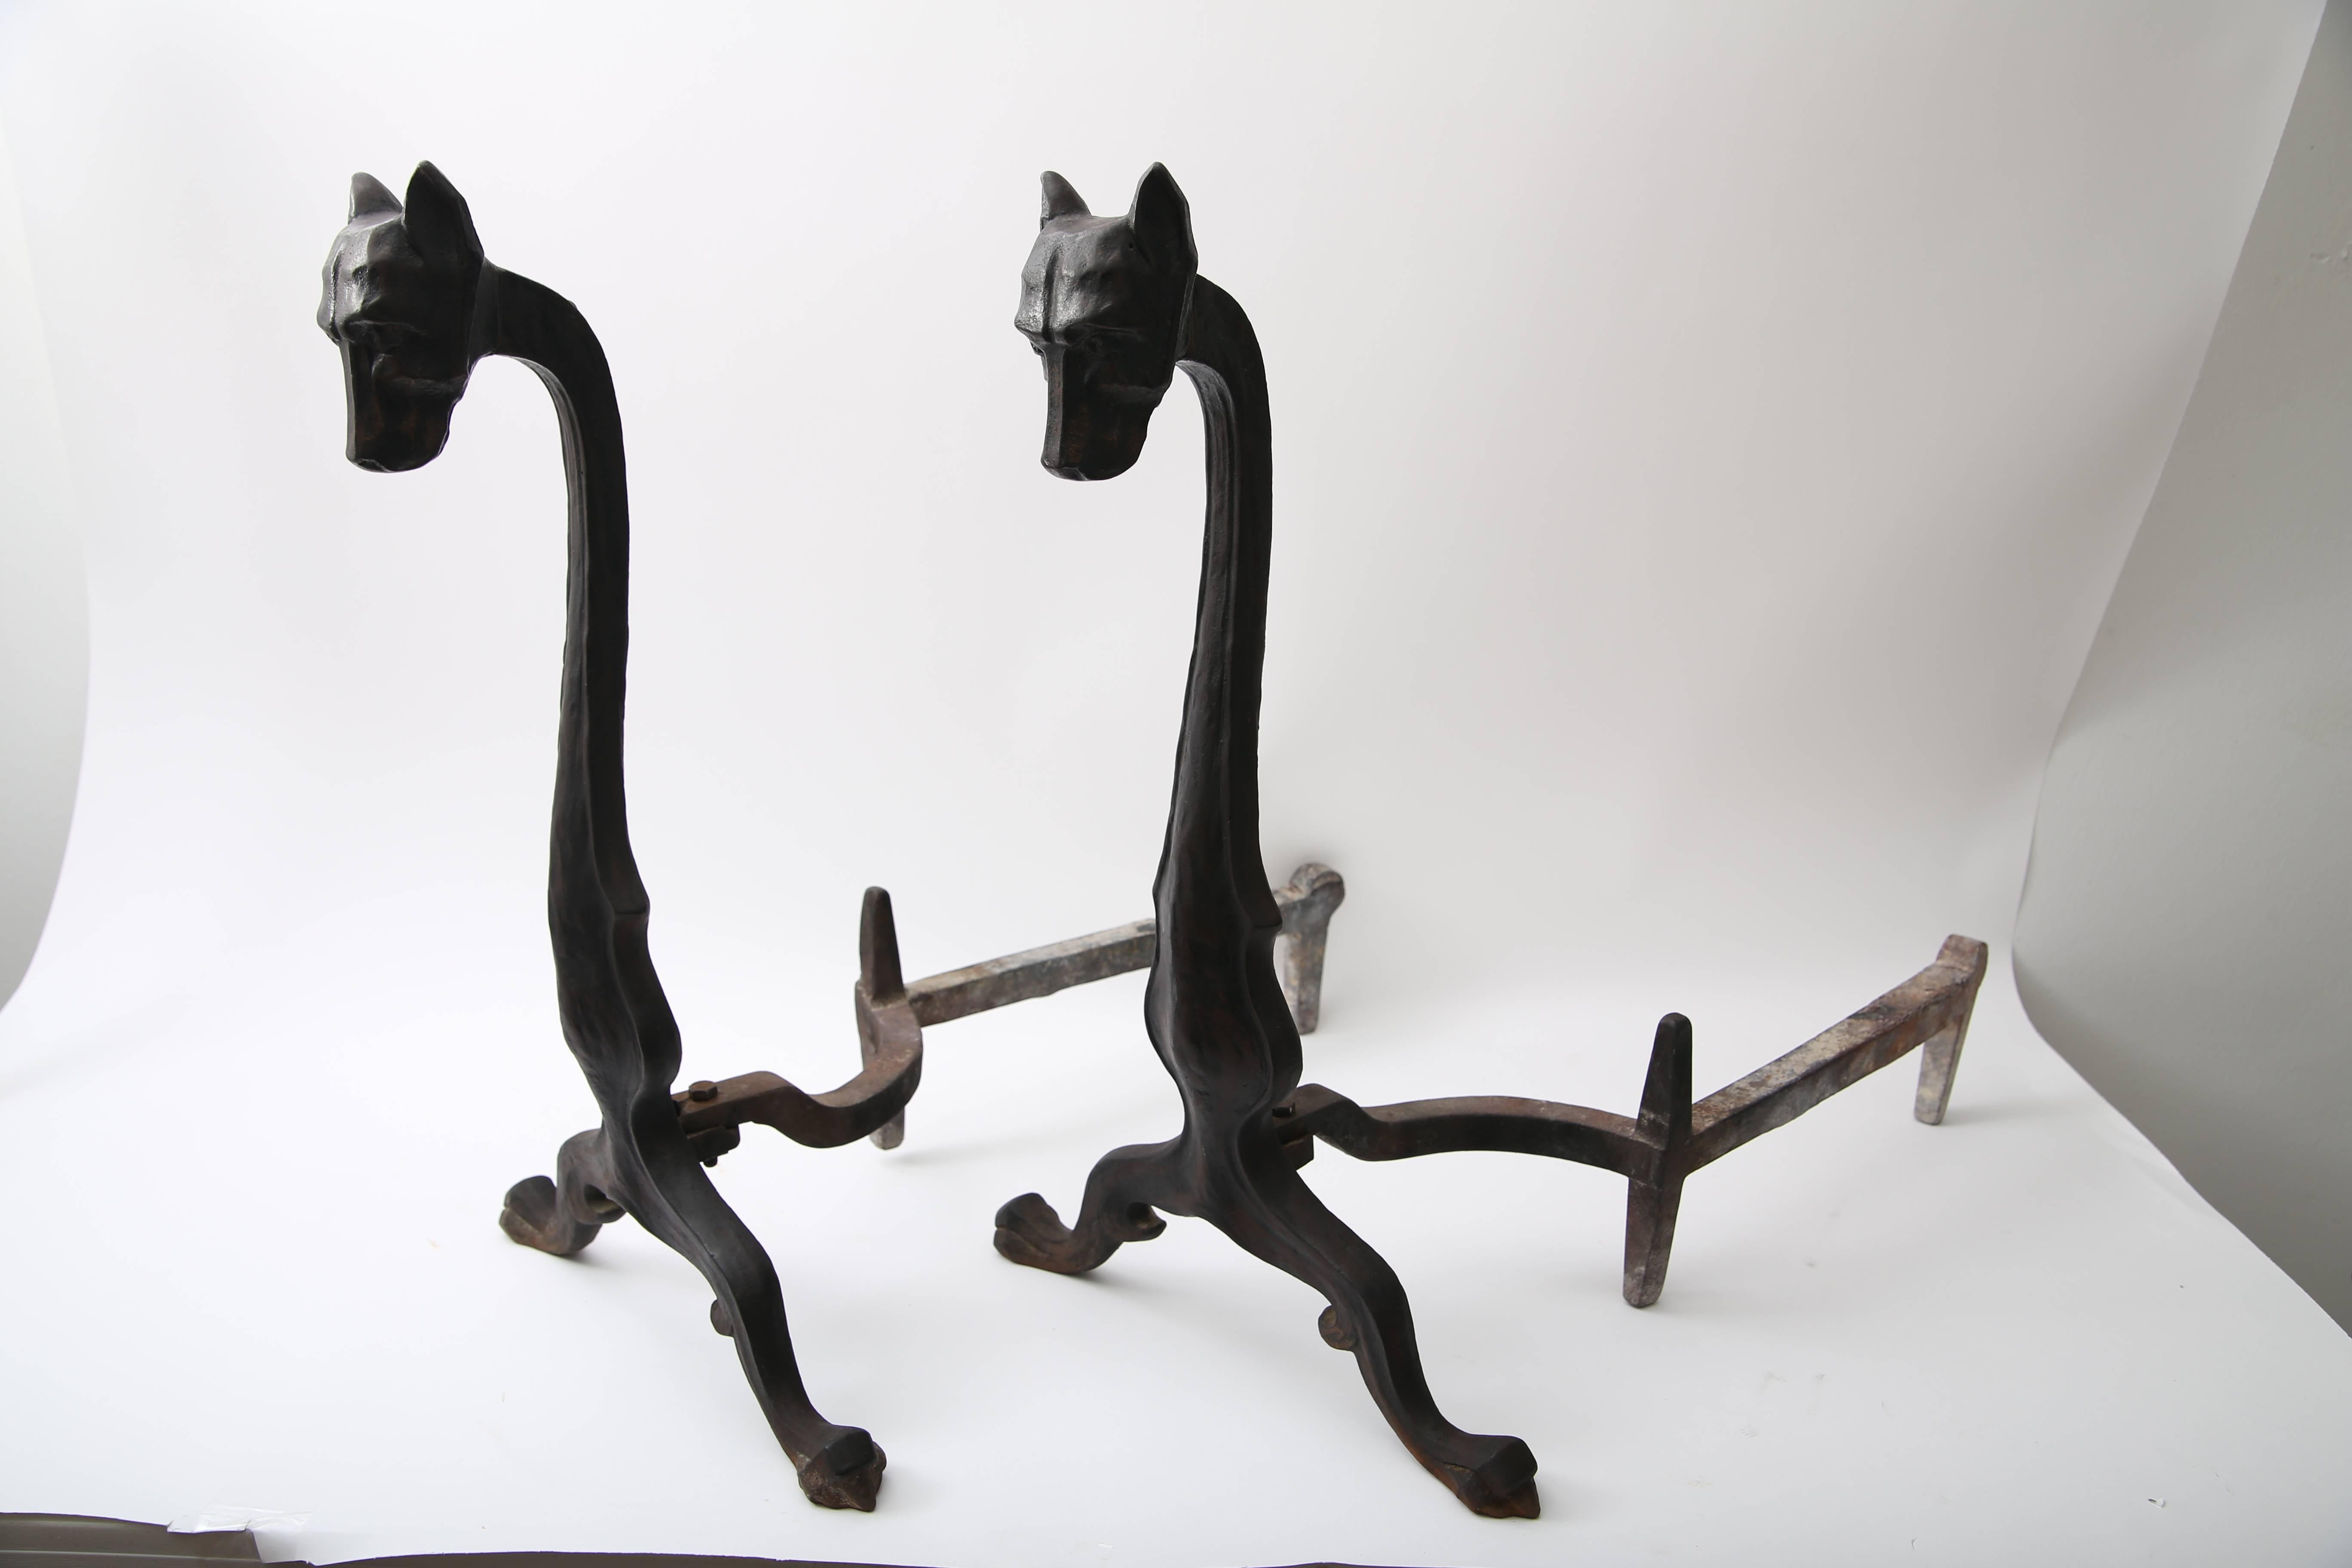 This pair of Art Deco style andirons were created by Bradley and Hubbard and are fabricated in hand-forged iron in the form of stylized dogs (hounds). 

FYI: 
Bradley & Hubbard Manufacturing Company
Fate Sold to the Charles Parker Company
Founded